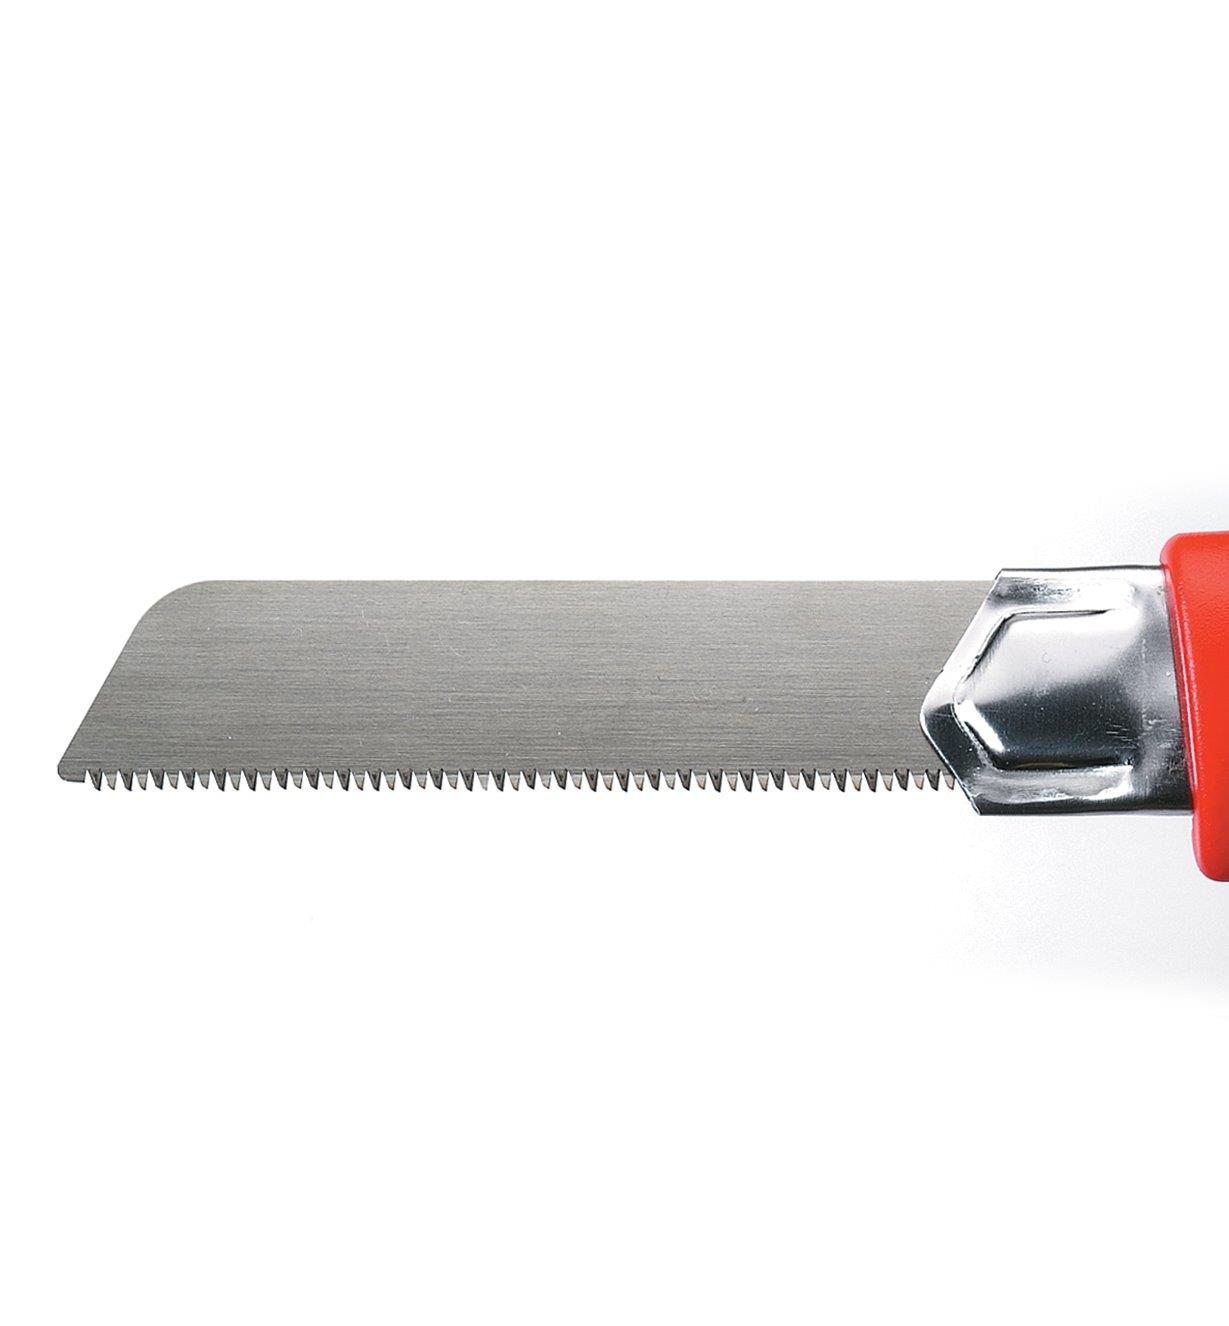 Close-up of the Retractable Japanese Saw blade